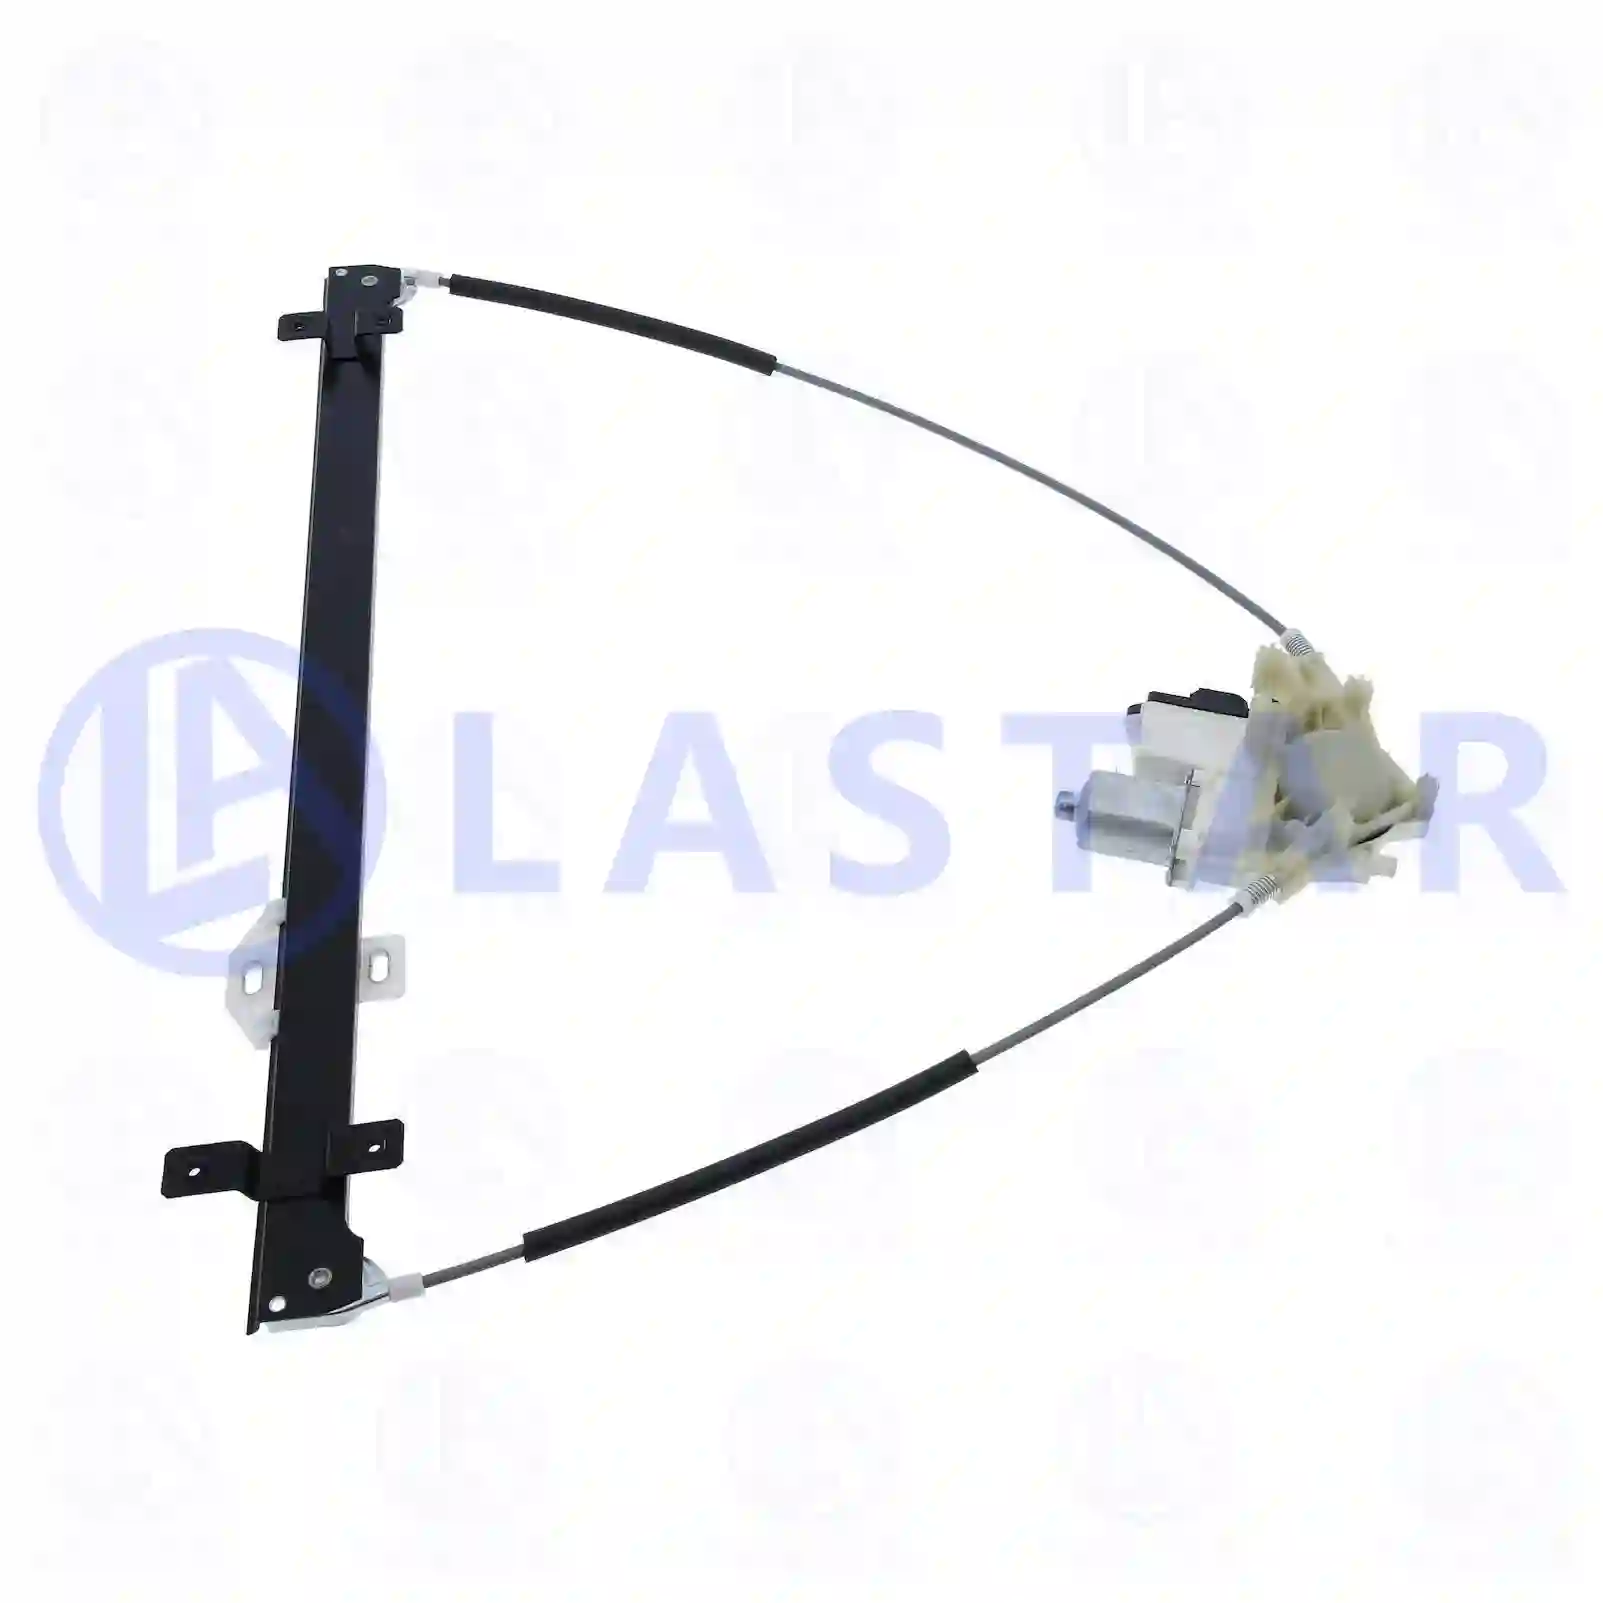 Window regulator, right, electrical, with motor, 77719929, 1779722, 1918146S, 2130643S, 2148574, ZG61319-0008 ||  77719929 Lastar Spare Part | Truck Spare Parts, Auotomotive Spare Parts Window regulator, right, electrical, with motor, 77719929, 1779722, 1918146S, 2130643S, 2148574, ZG61319-0008 ||  77719929 Lastar Spare Part | Truck Spare Parts, Auotomotive Spare Parts